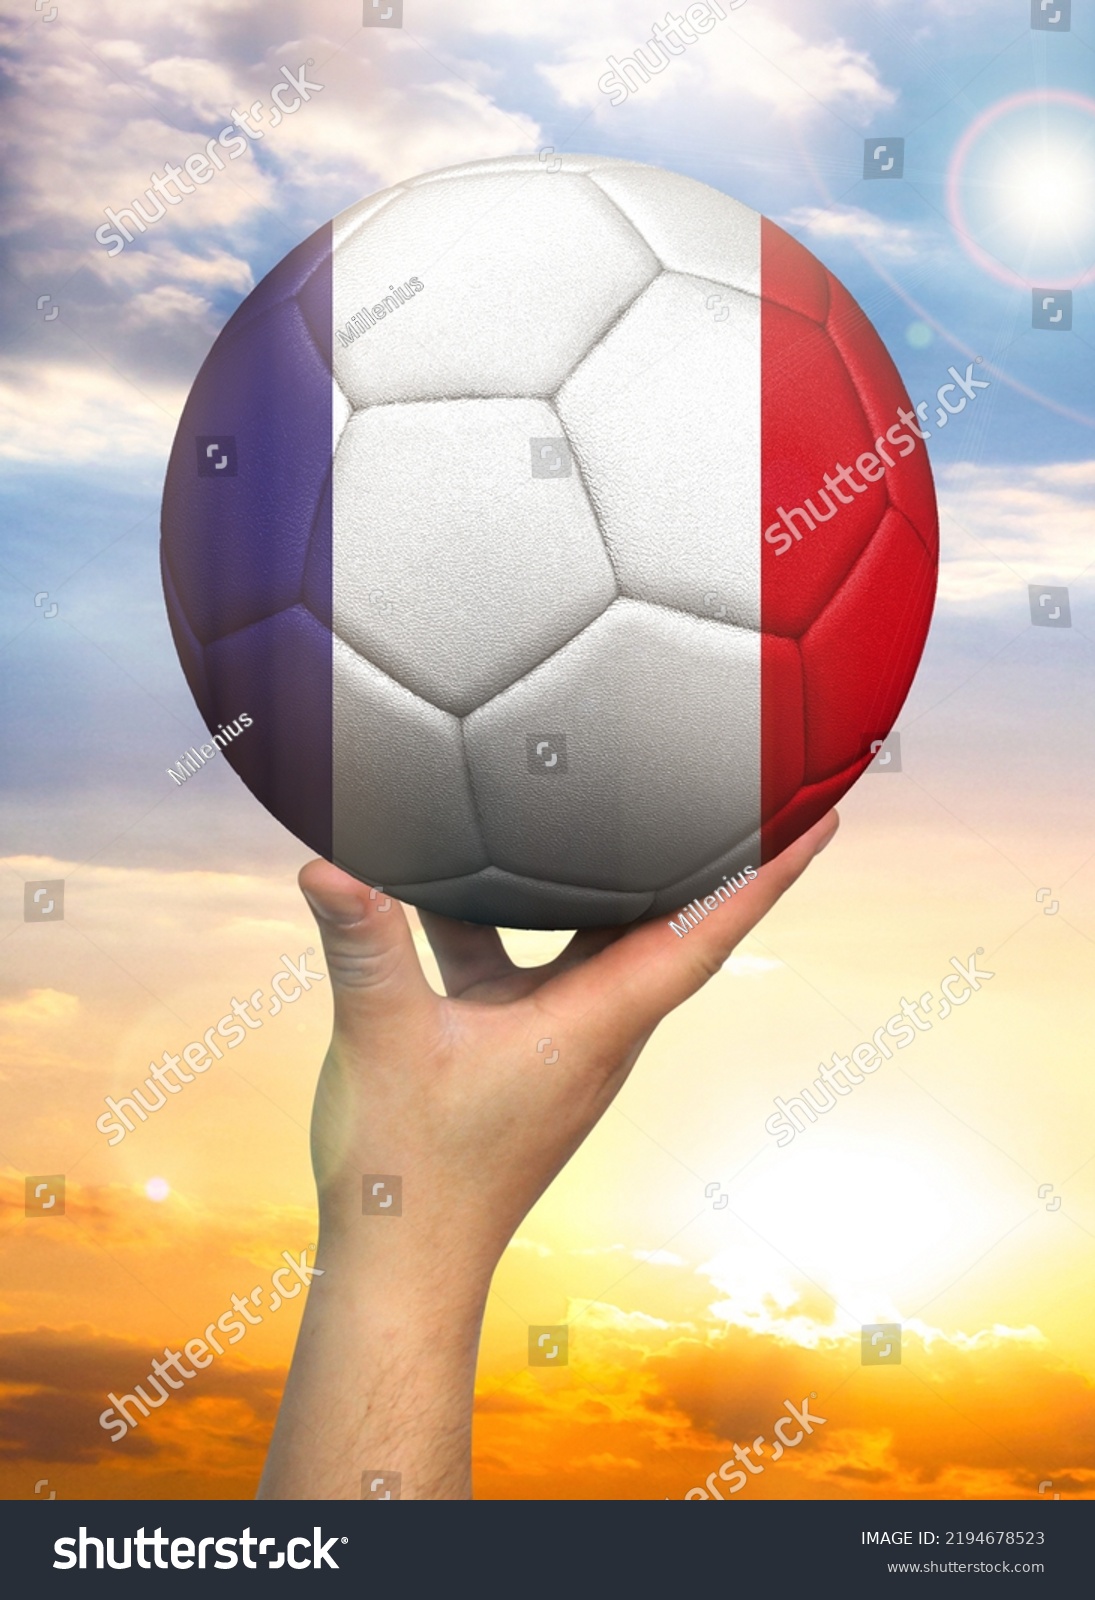 Soccer ball in hand with a depiction of the flag of France against a colorful sky #2194678523